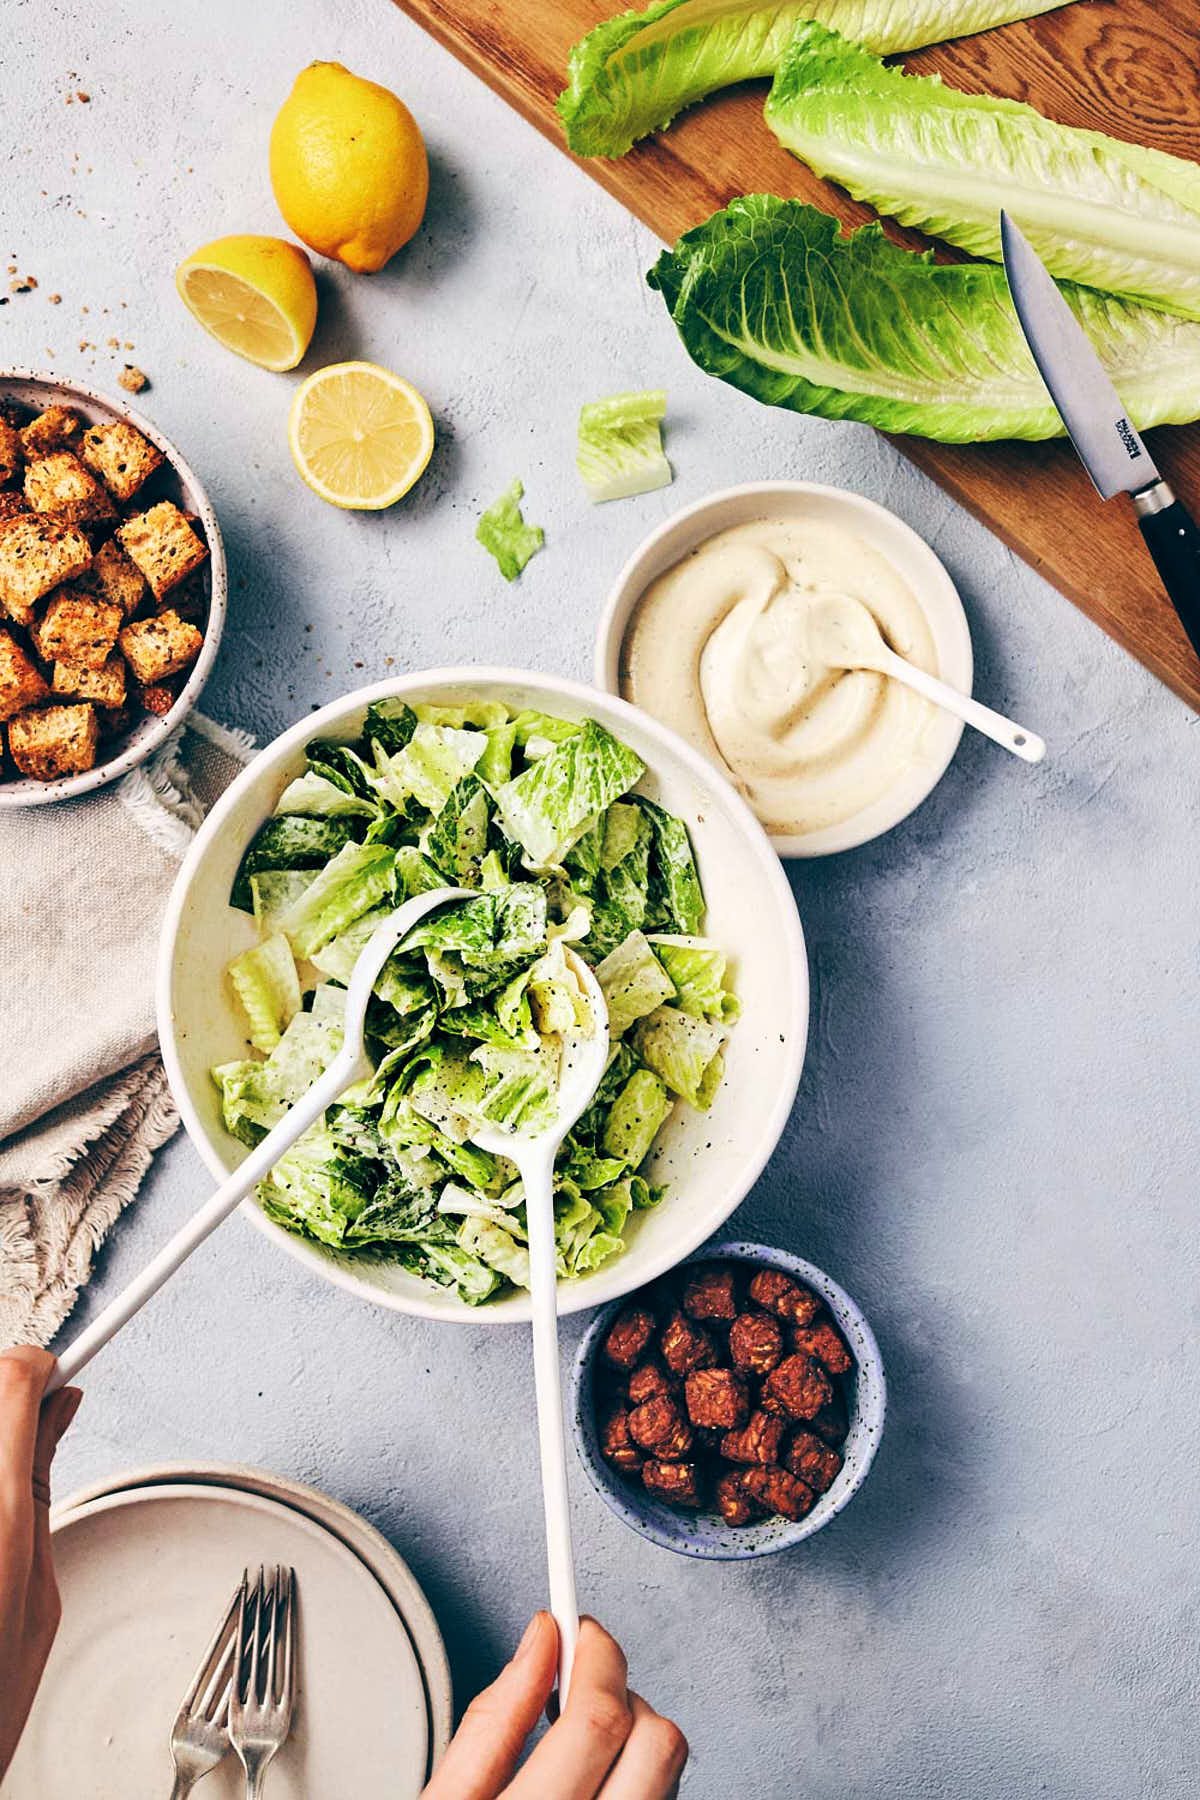 Hands tossing Caesar lettuce with dressing before being topped with tempeh and crispy croutons